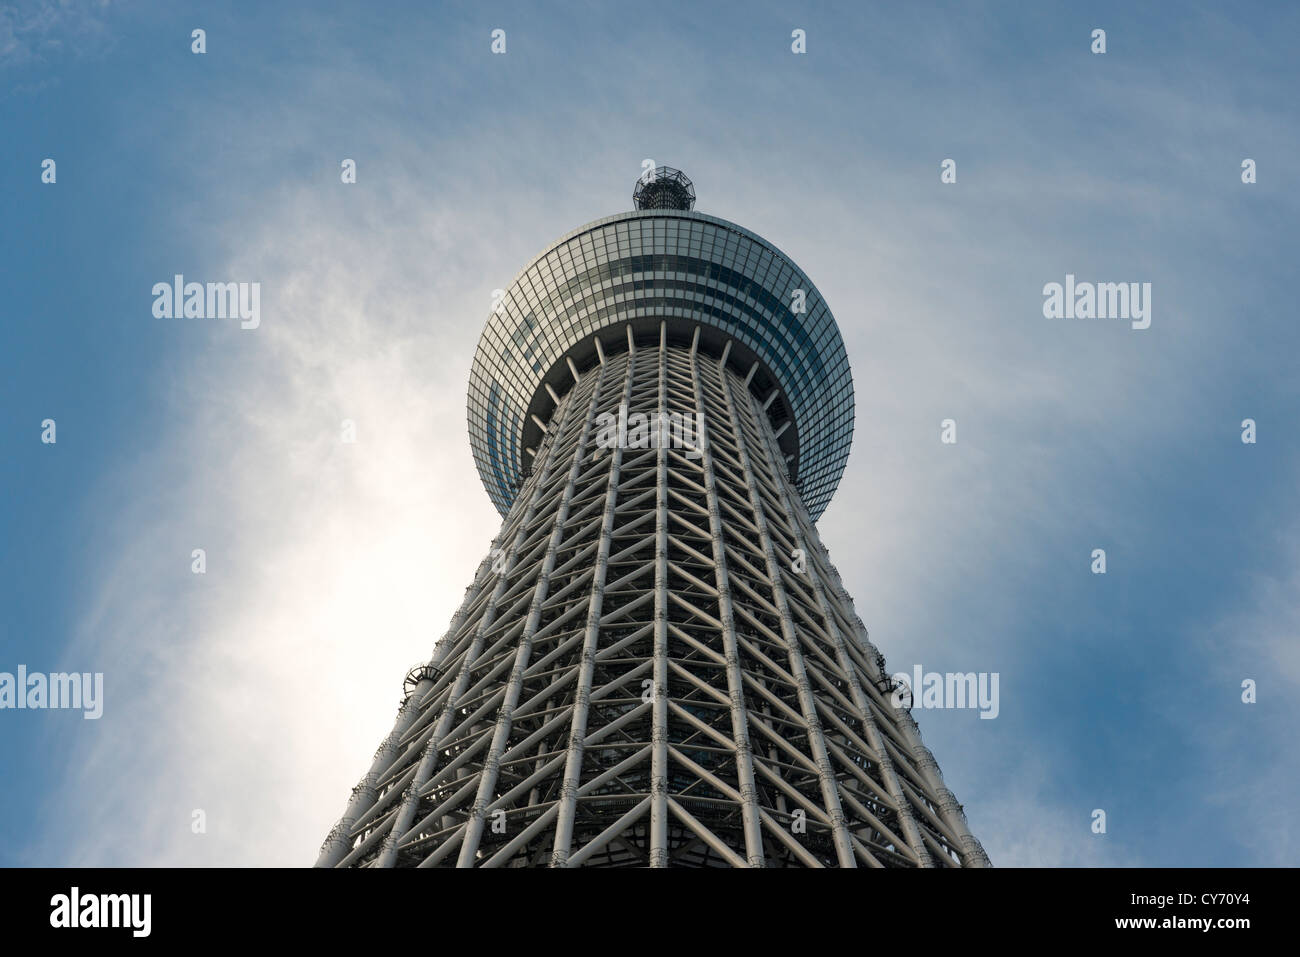 Tokyo Skytree at 634m, is the tallest free-standing broadcasting tower in the world. Sumida Tokyo Japan Stock Photo